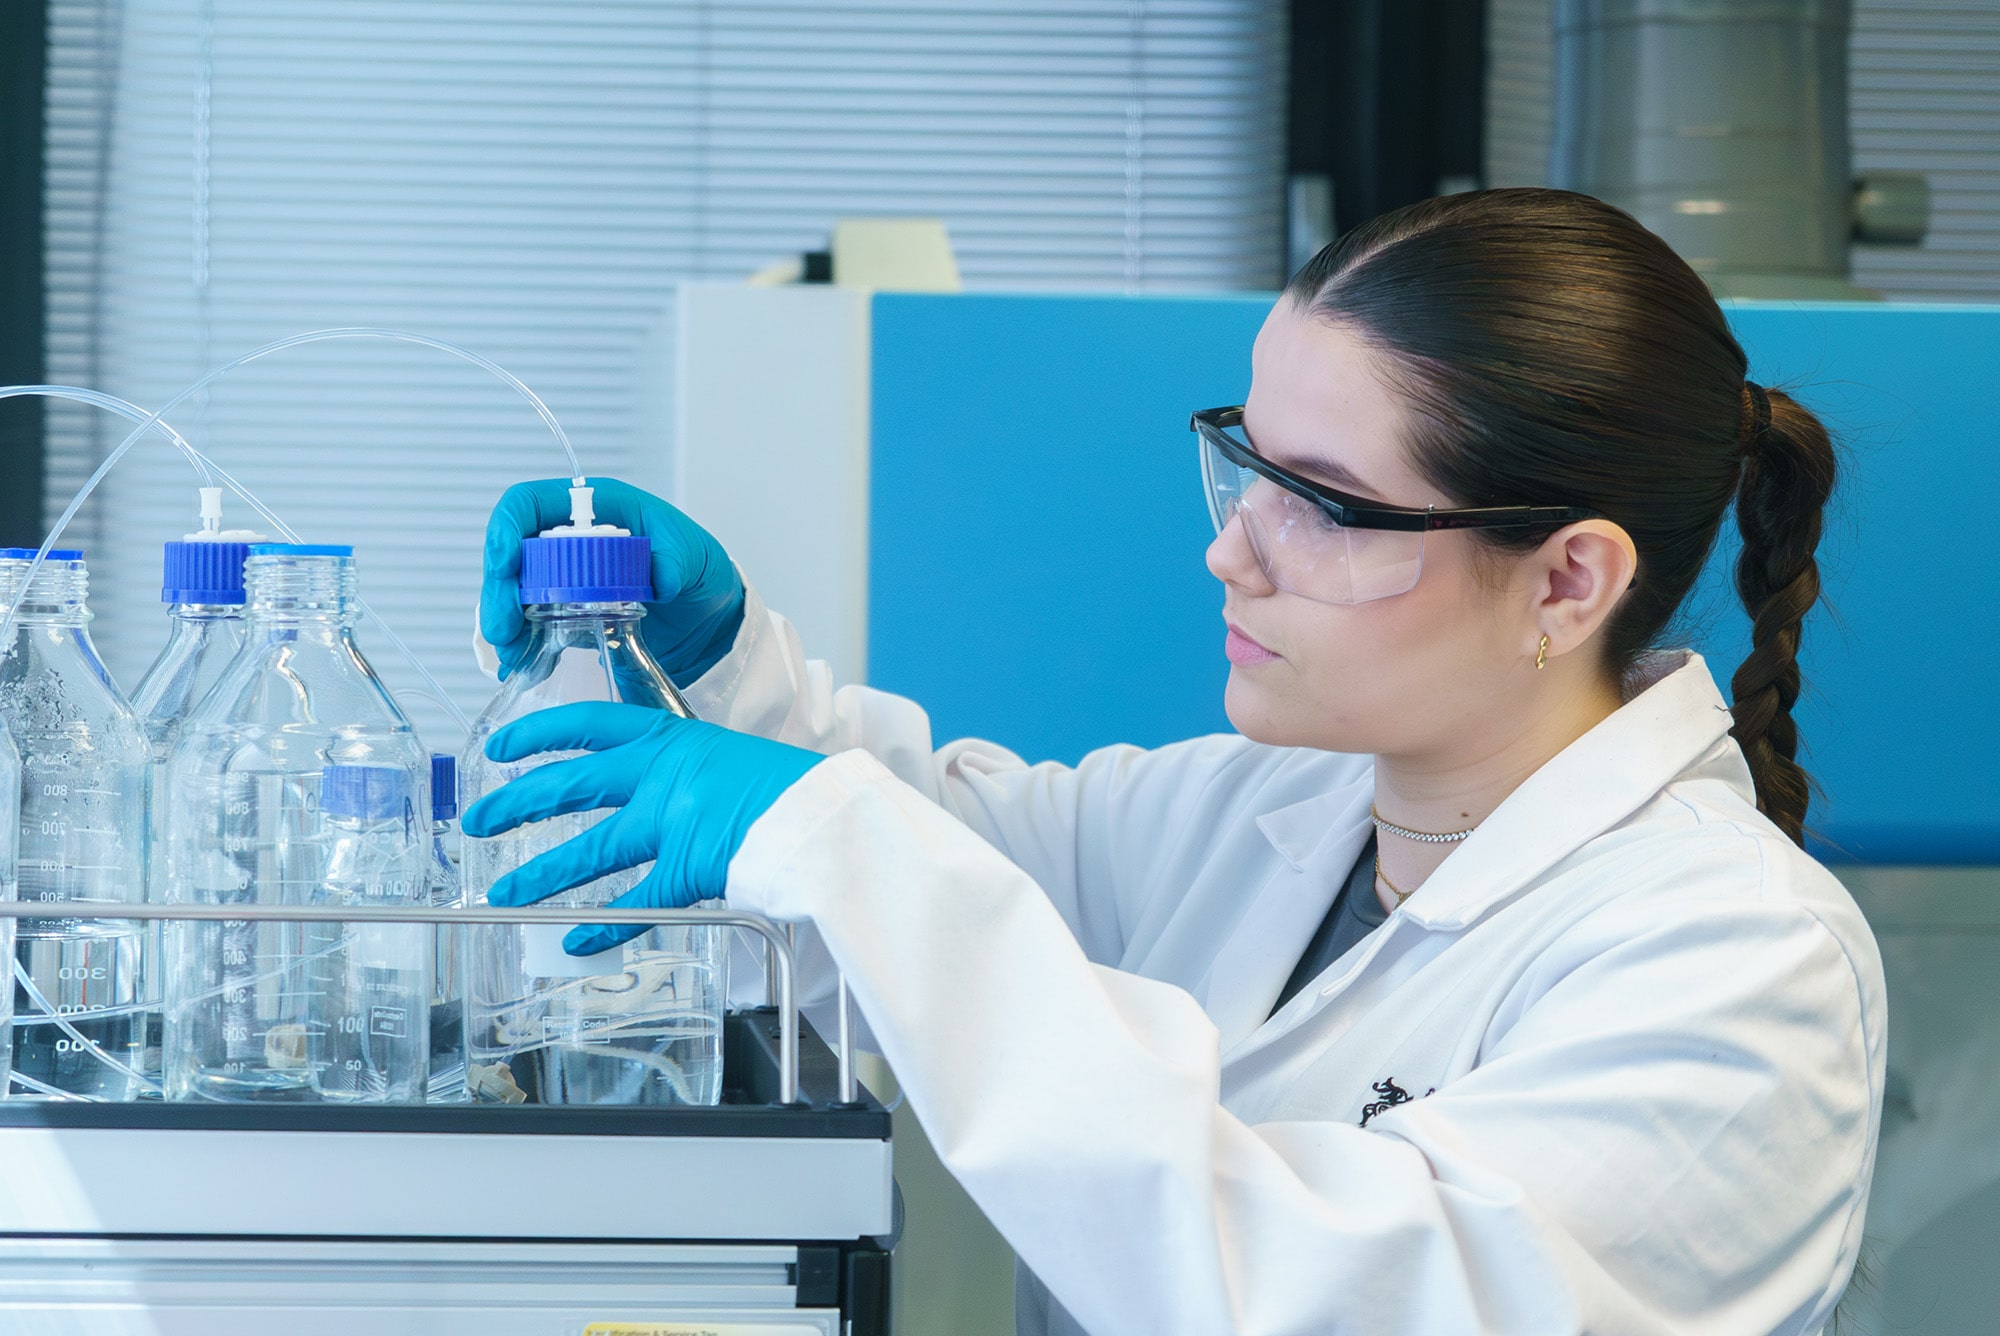 A student analysing beakers in a lab